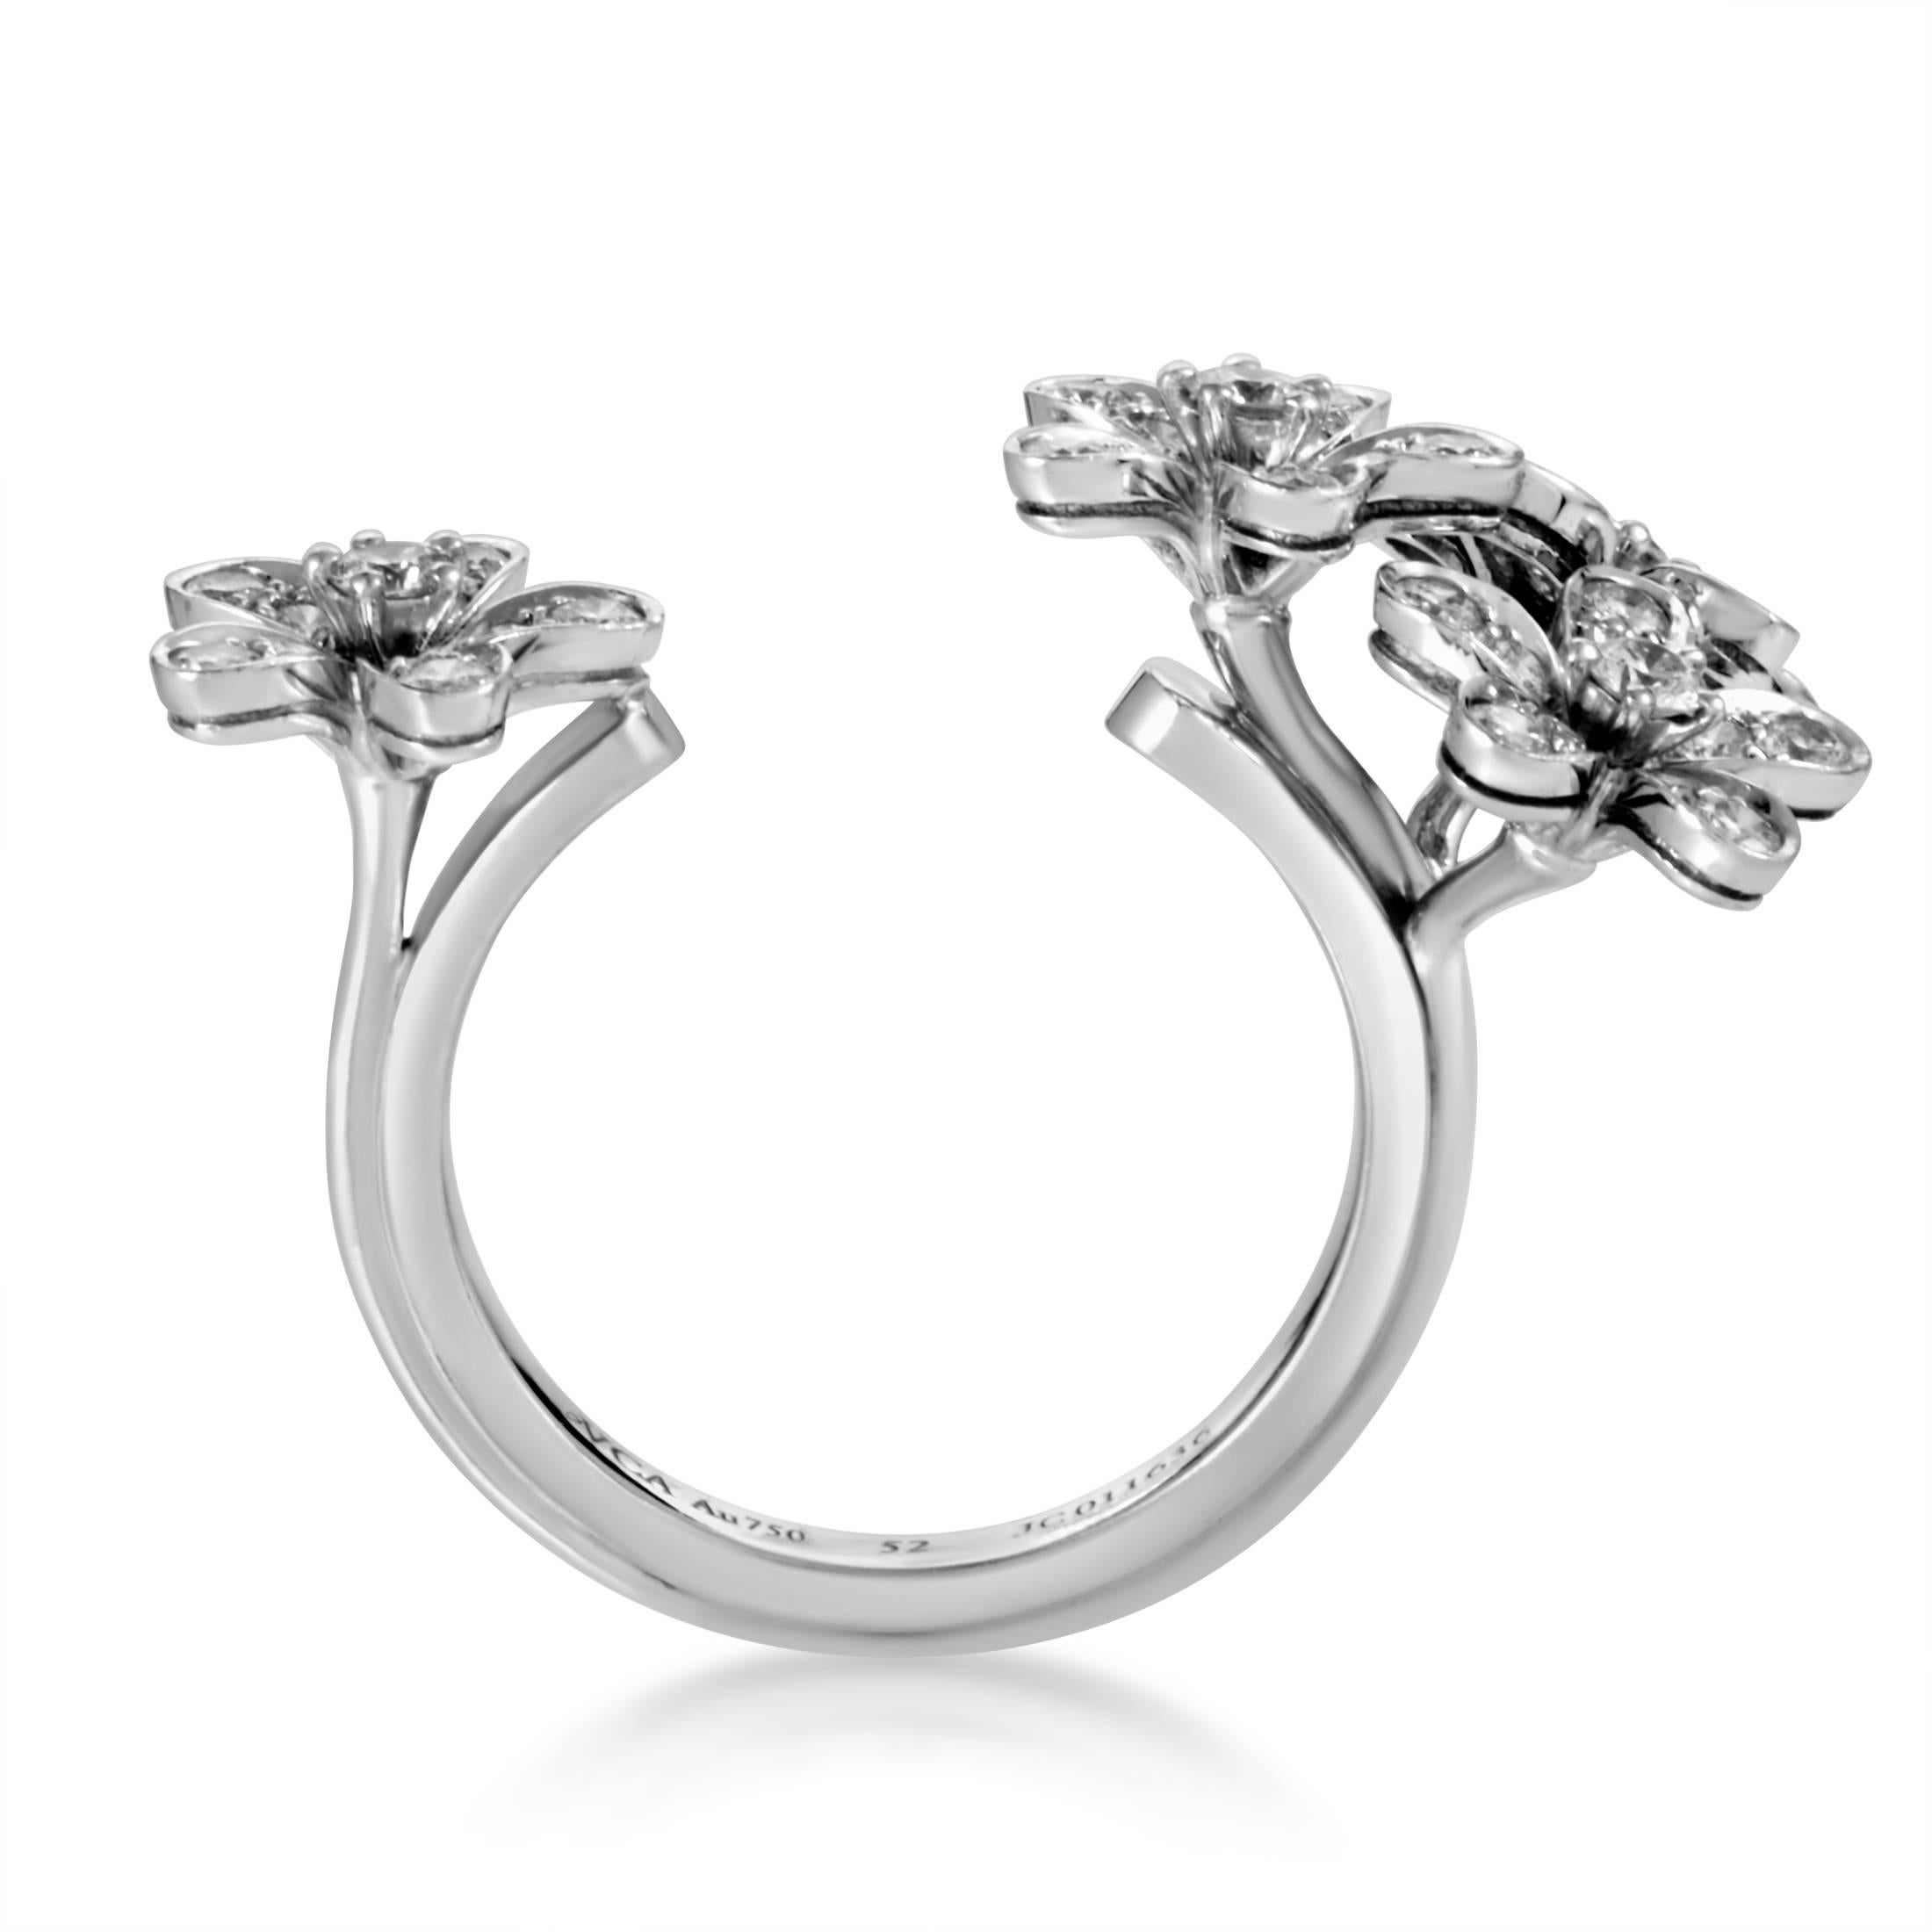 Created for the imaginative “Socrate” collection by Van Cleef & Arpels, this gorgeous ring features the endearing floral design that the collection is renowned for. The ring is made of elegant 18K white gold and beautifully set with scintillating